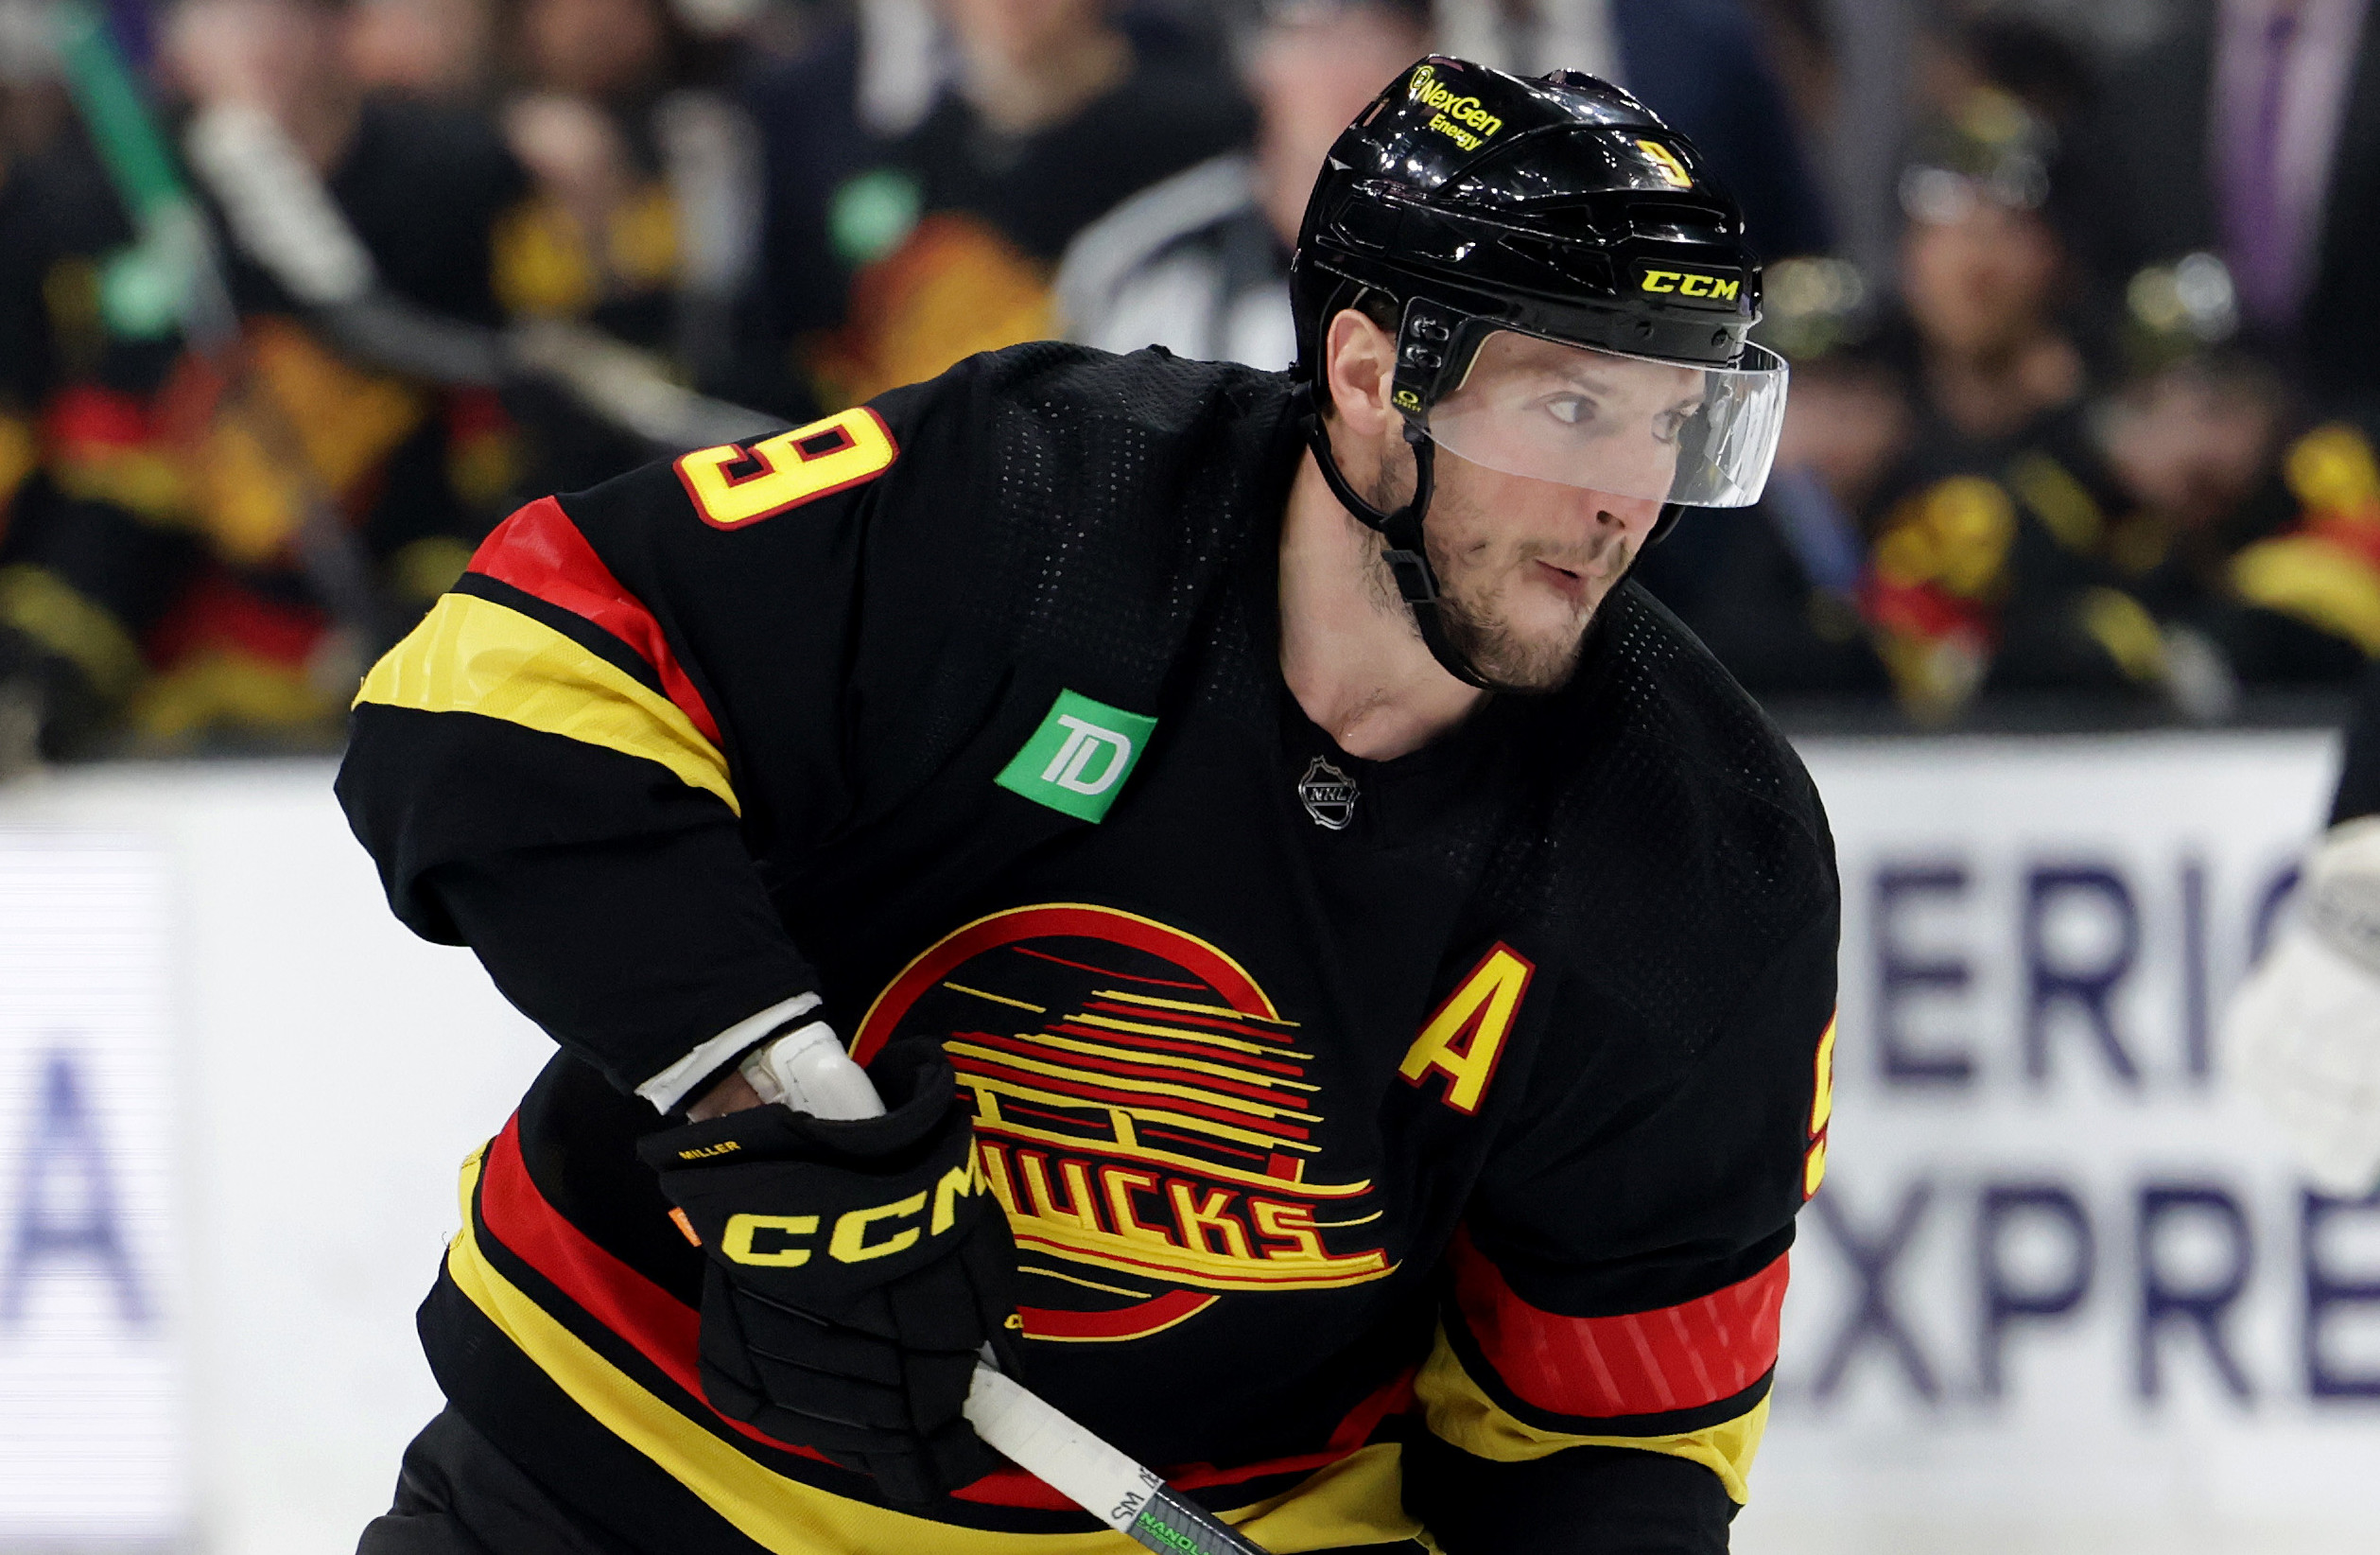 Vancouver Canucks sign free-agent forward Pius Suter